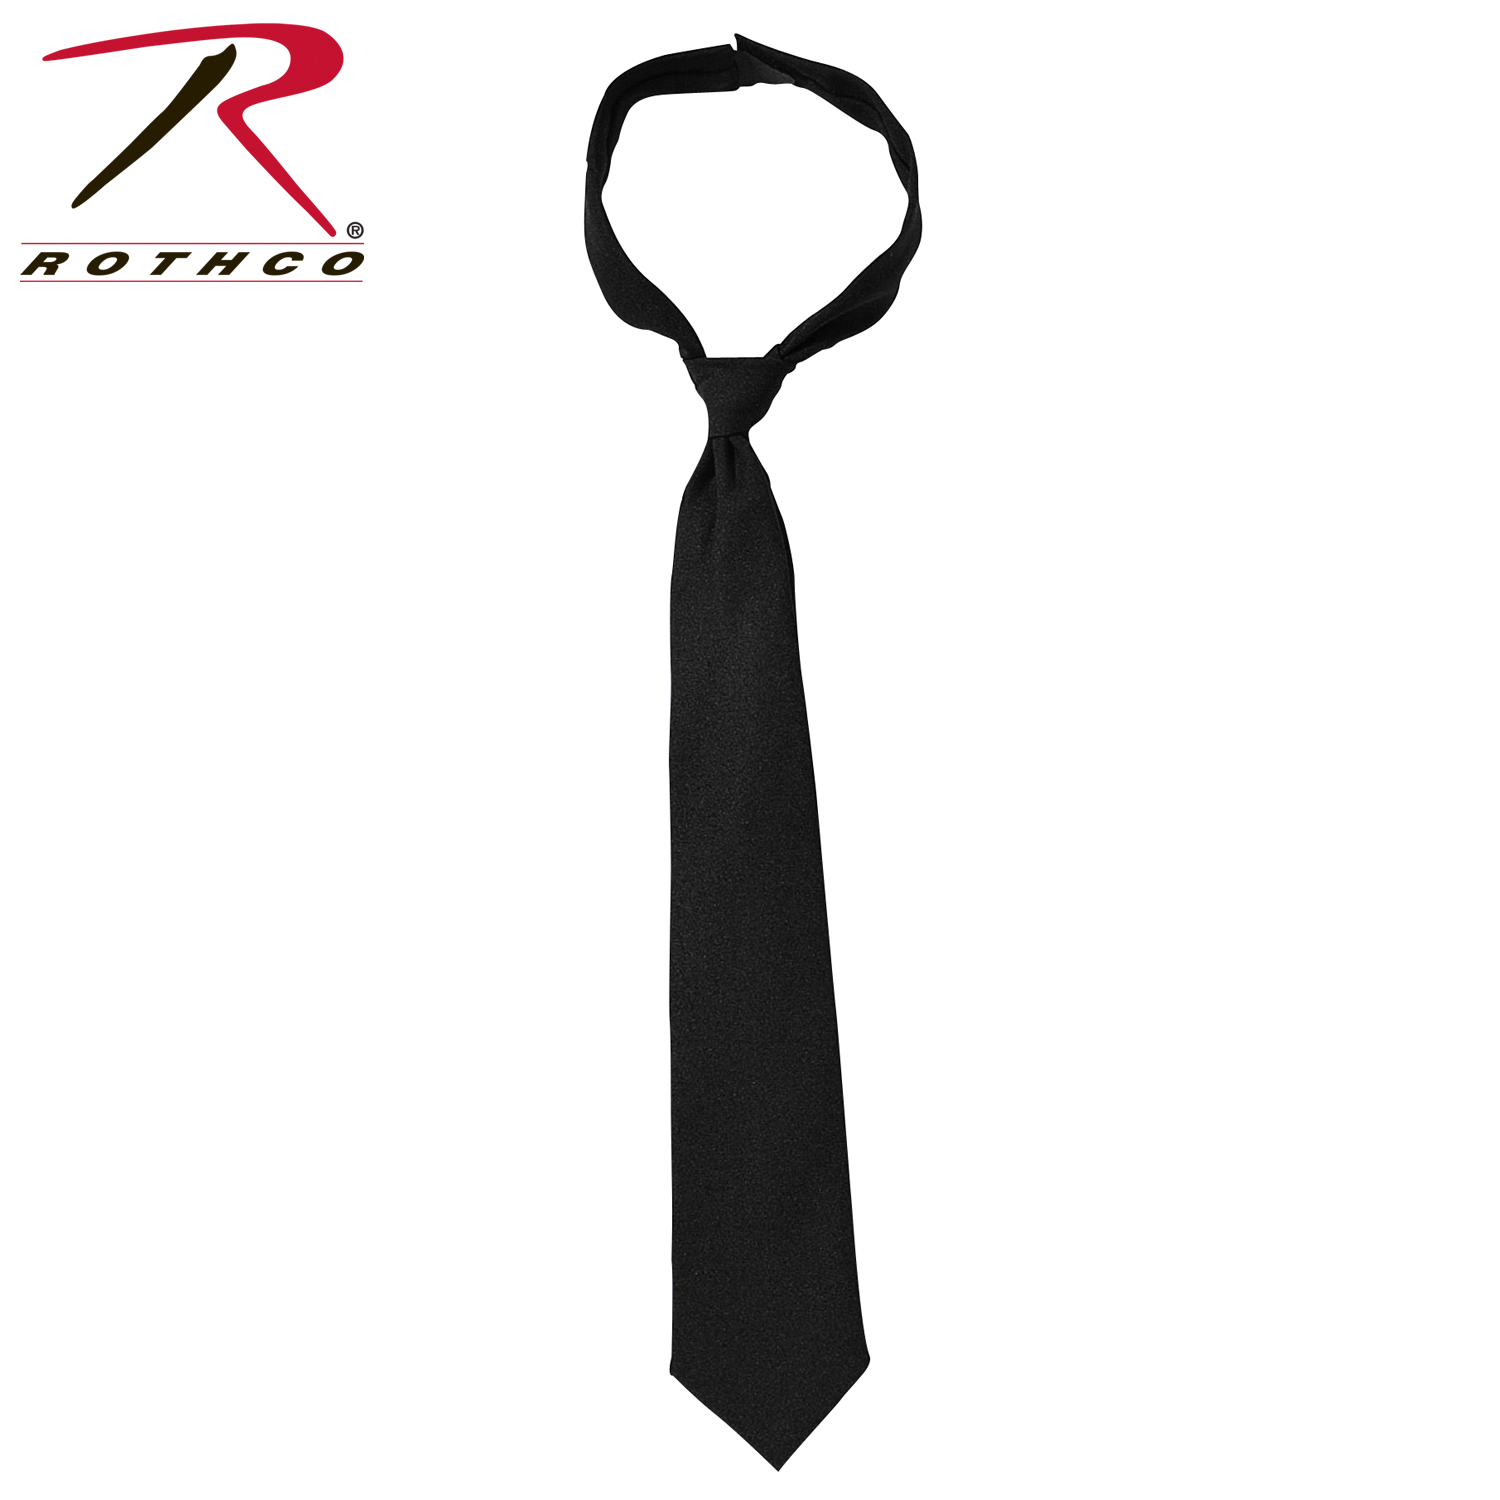 Rothco Police Issue Neckties - Assorted